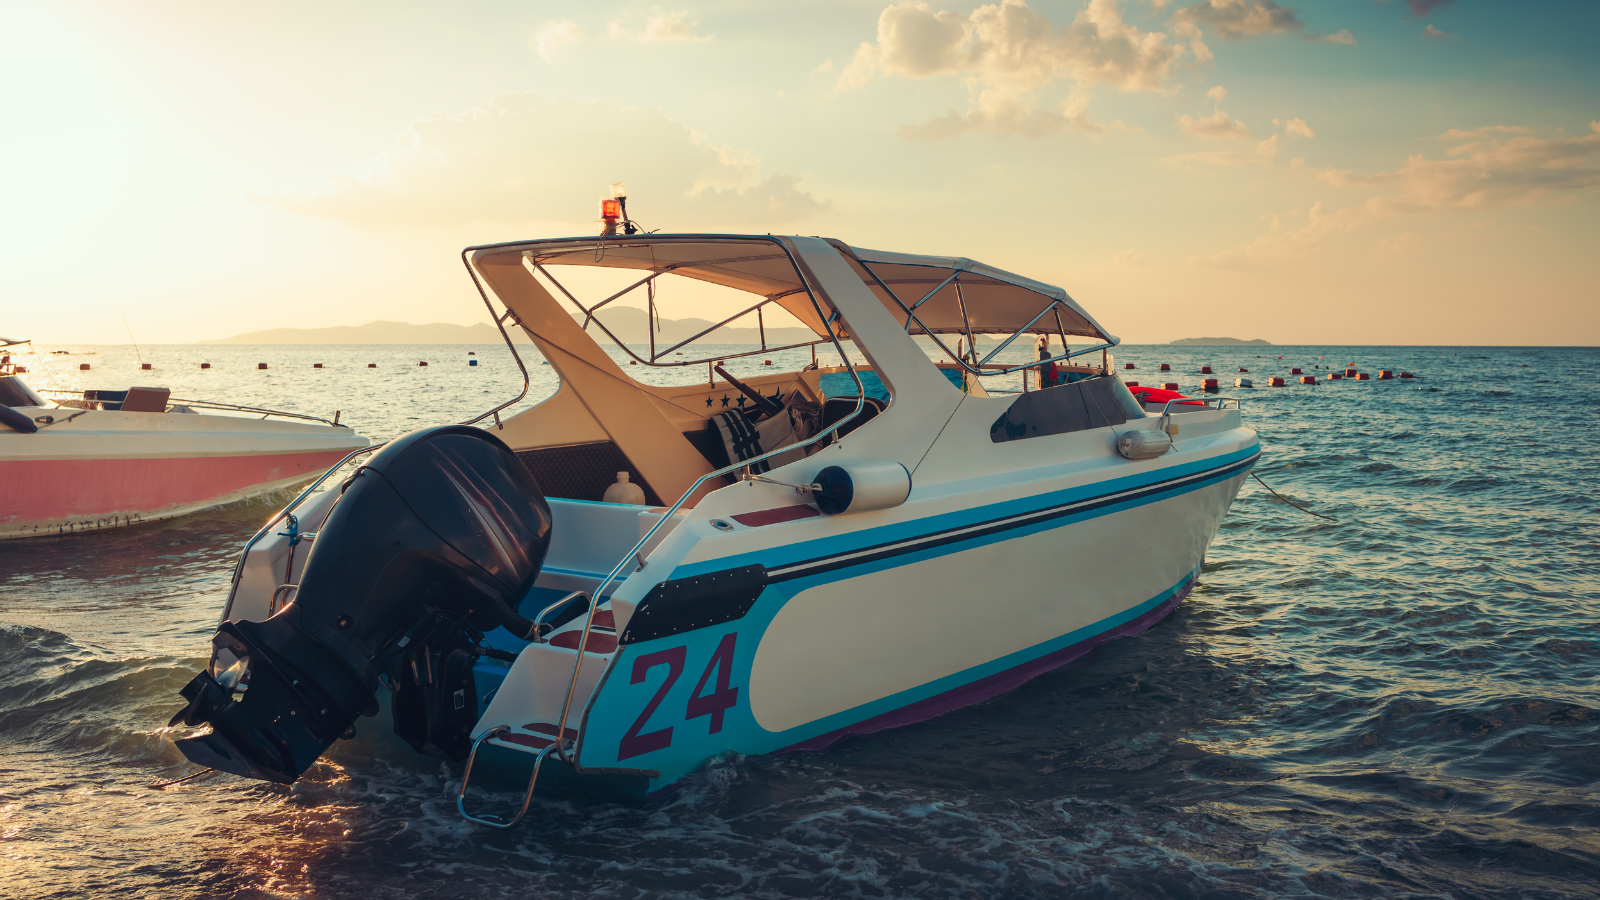 A Complete Guide on How to Buy a Boat